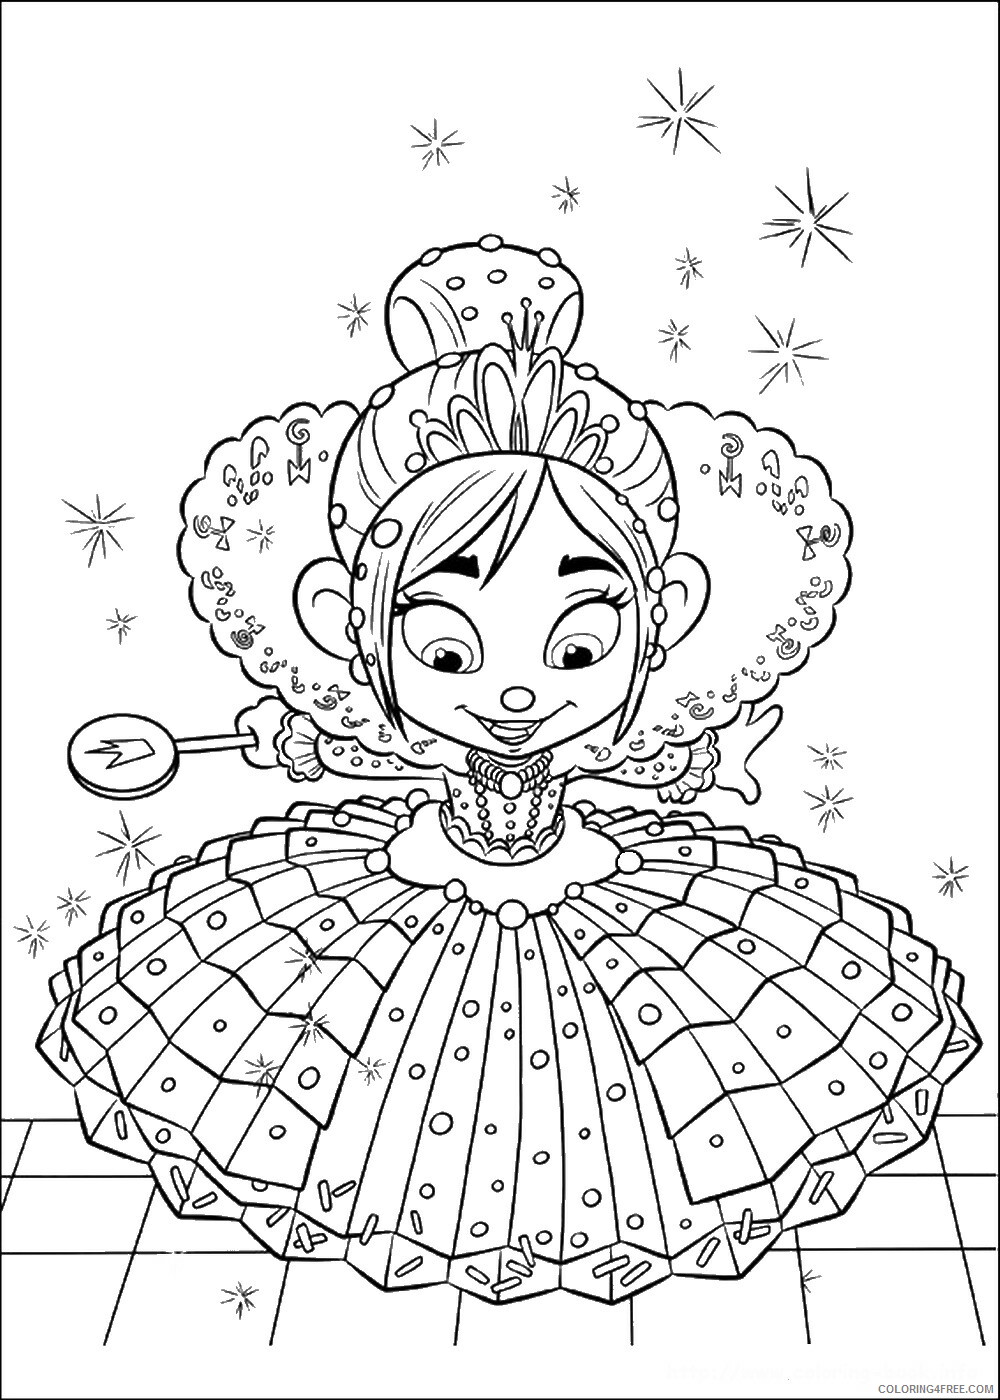 Wreck It Ralph Coloring Pages TV Film ralph_cl_02 Printable 2020 11789 Coloring4free